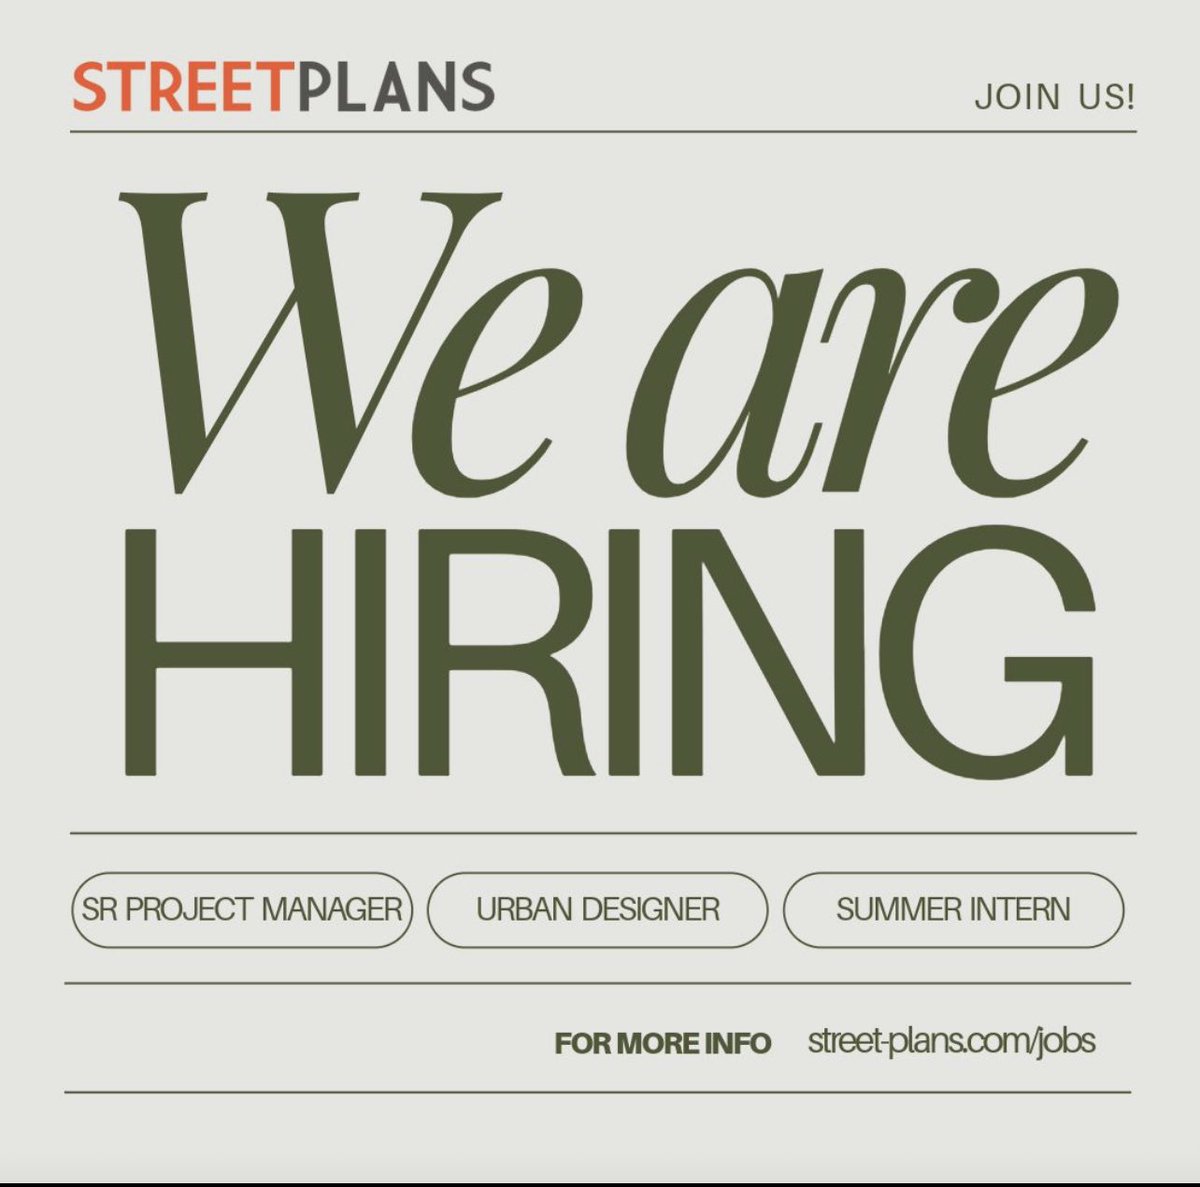 We are looking for three new @StreetPlans colleagues who are passionate about transforming cities. Take a look and apply if you think you’d be a good fit! street-plans.com/jobs/